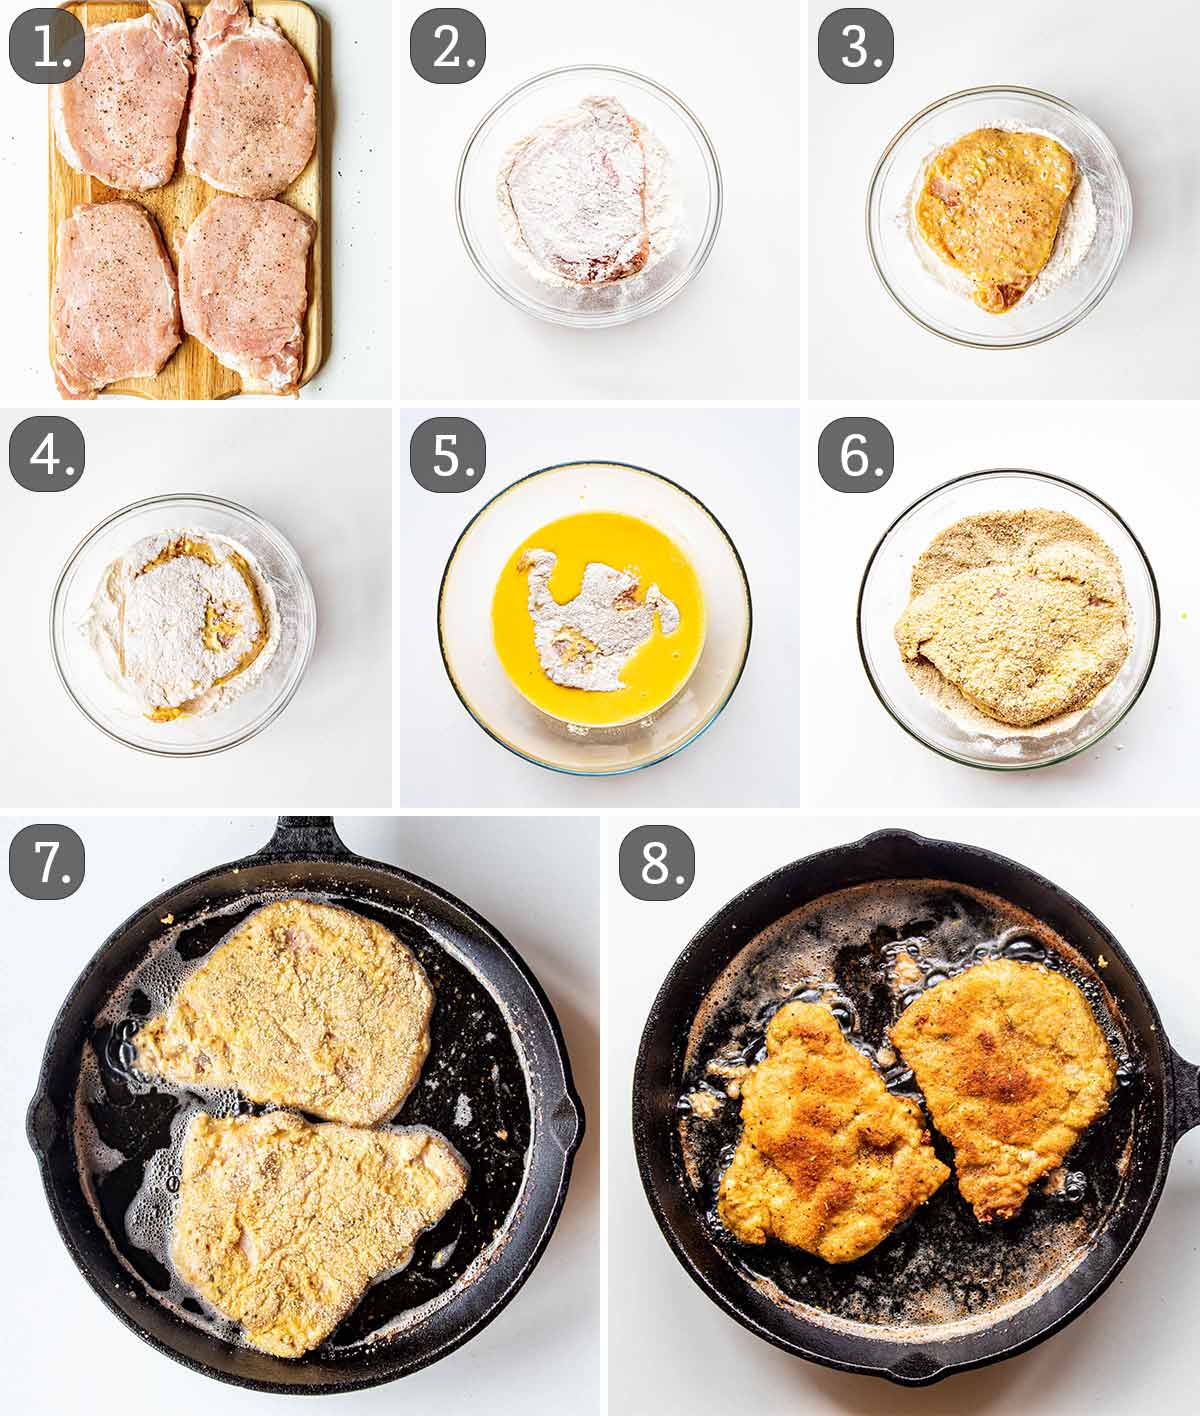 detailed process shots showing how to make fried pork chops.